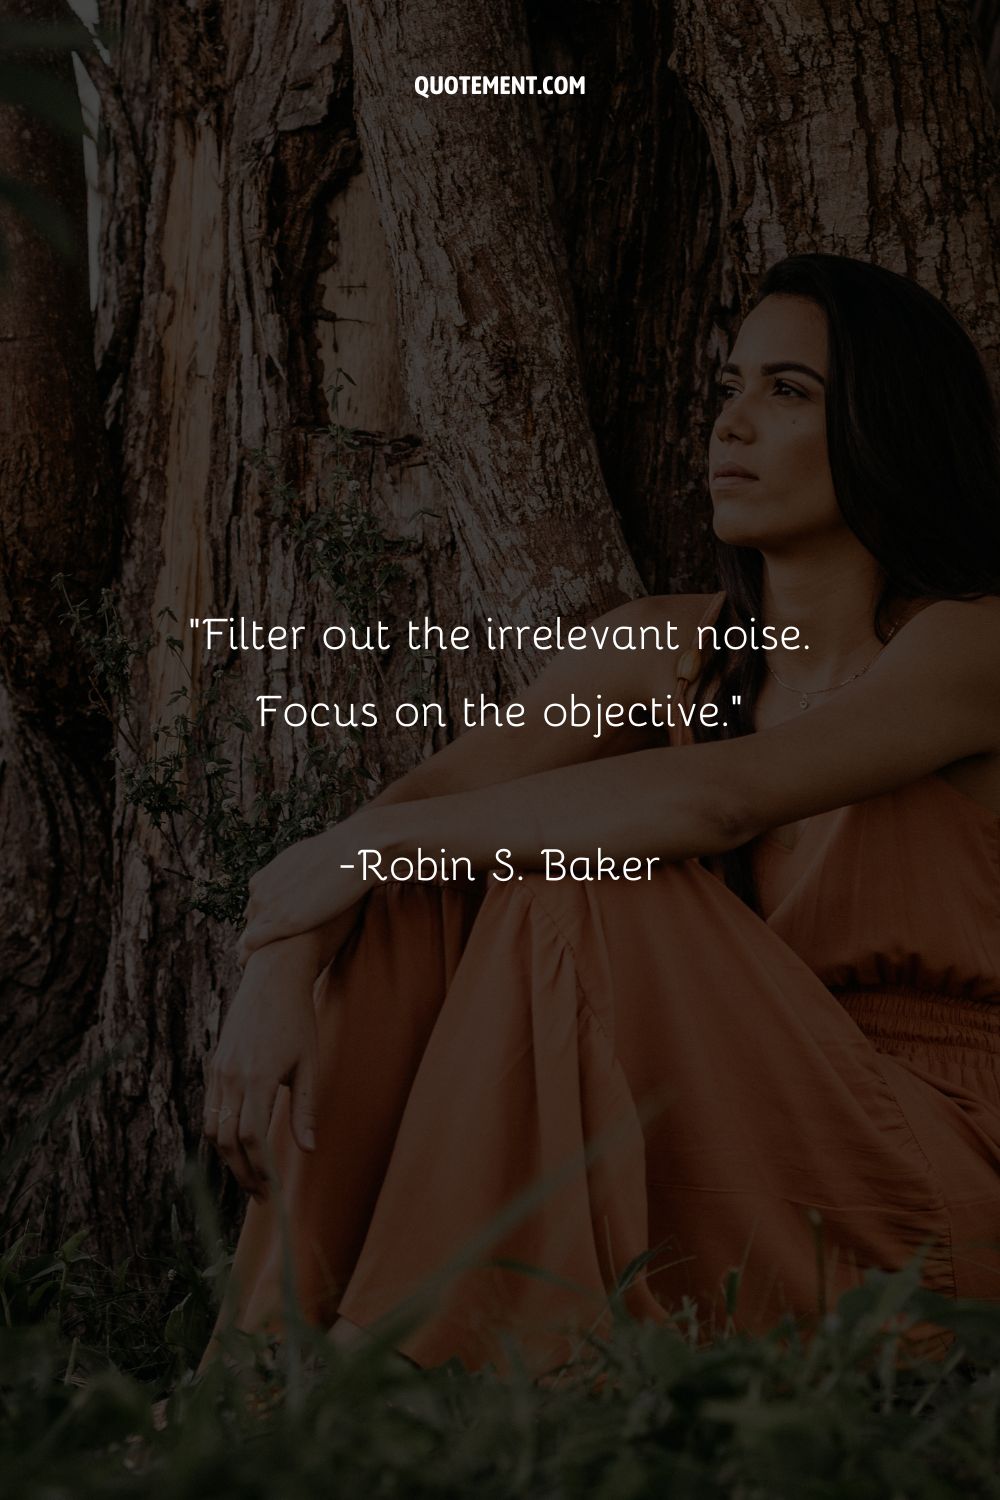 Filter out the irrelevant noise. Focus on the objective